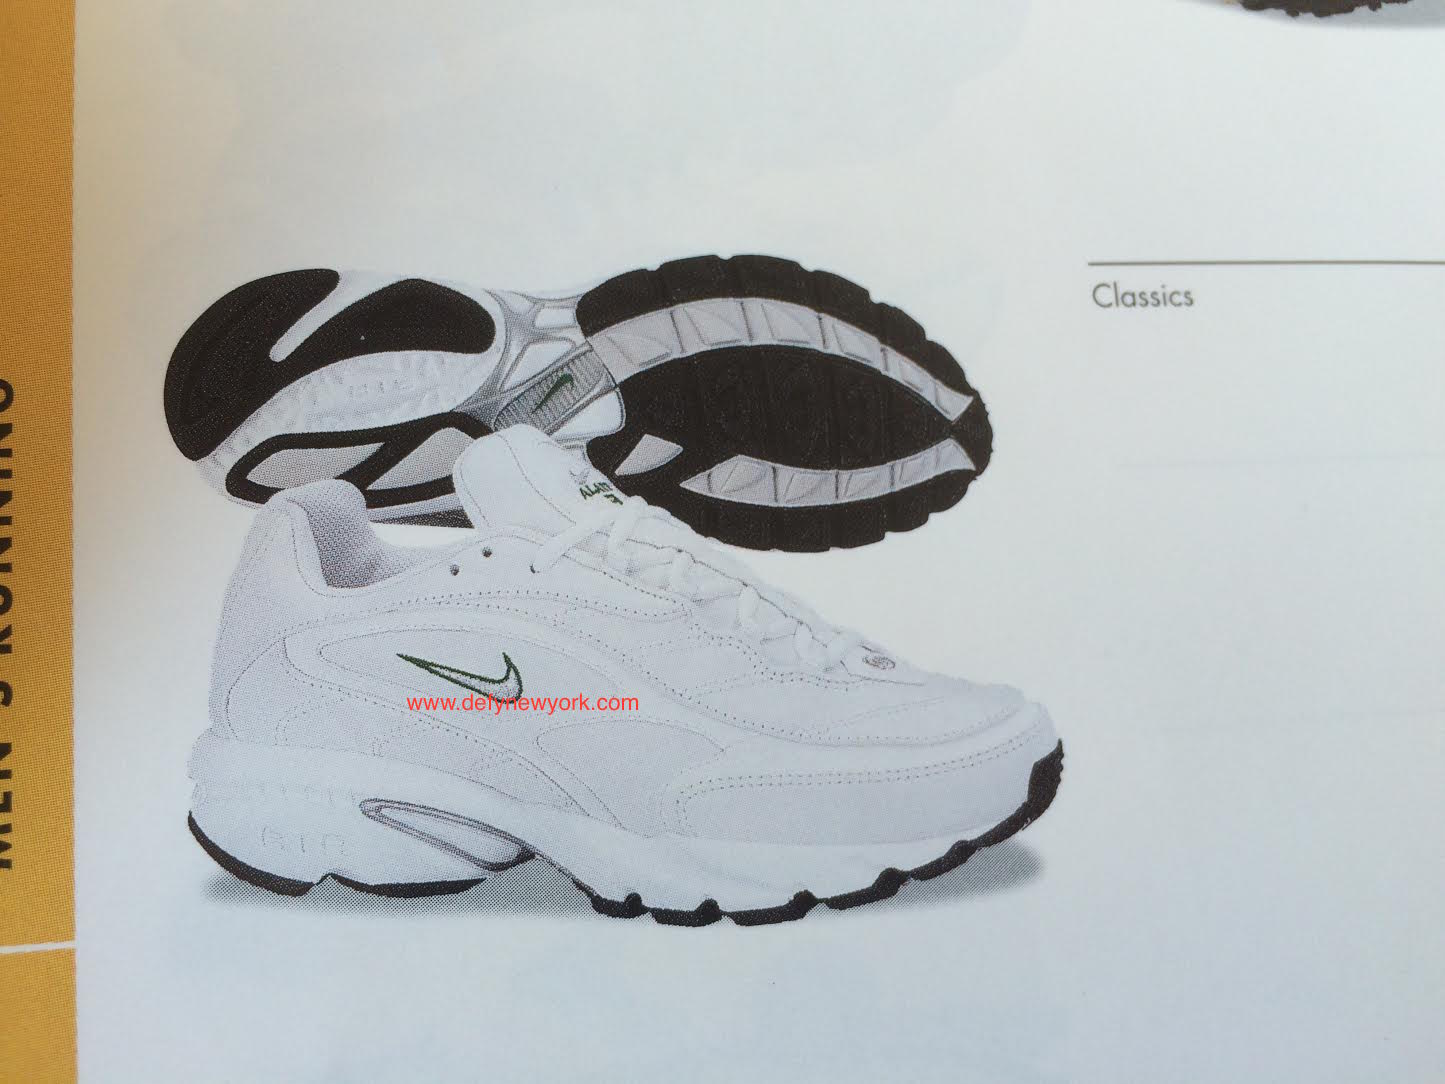 nike shoes released in 2000